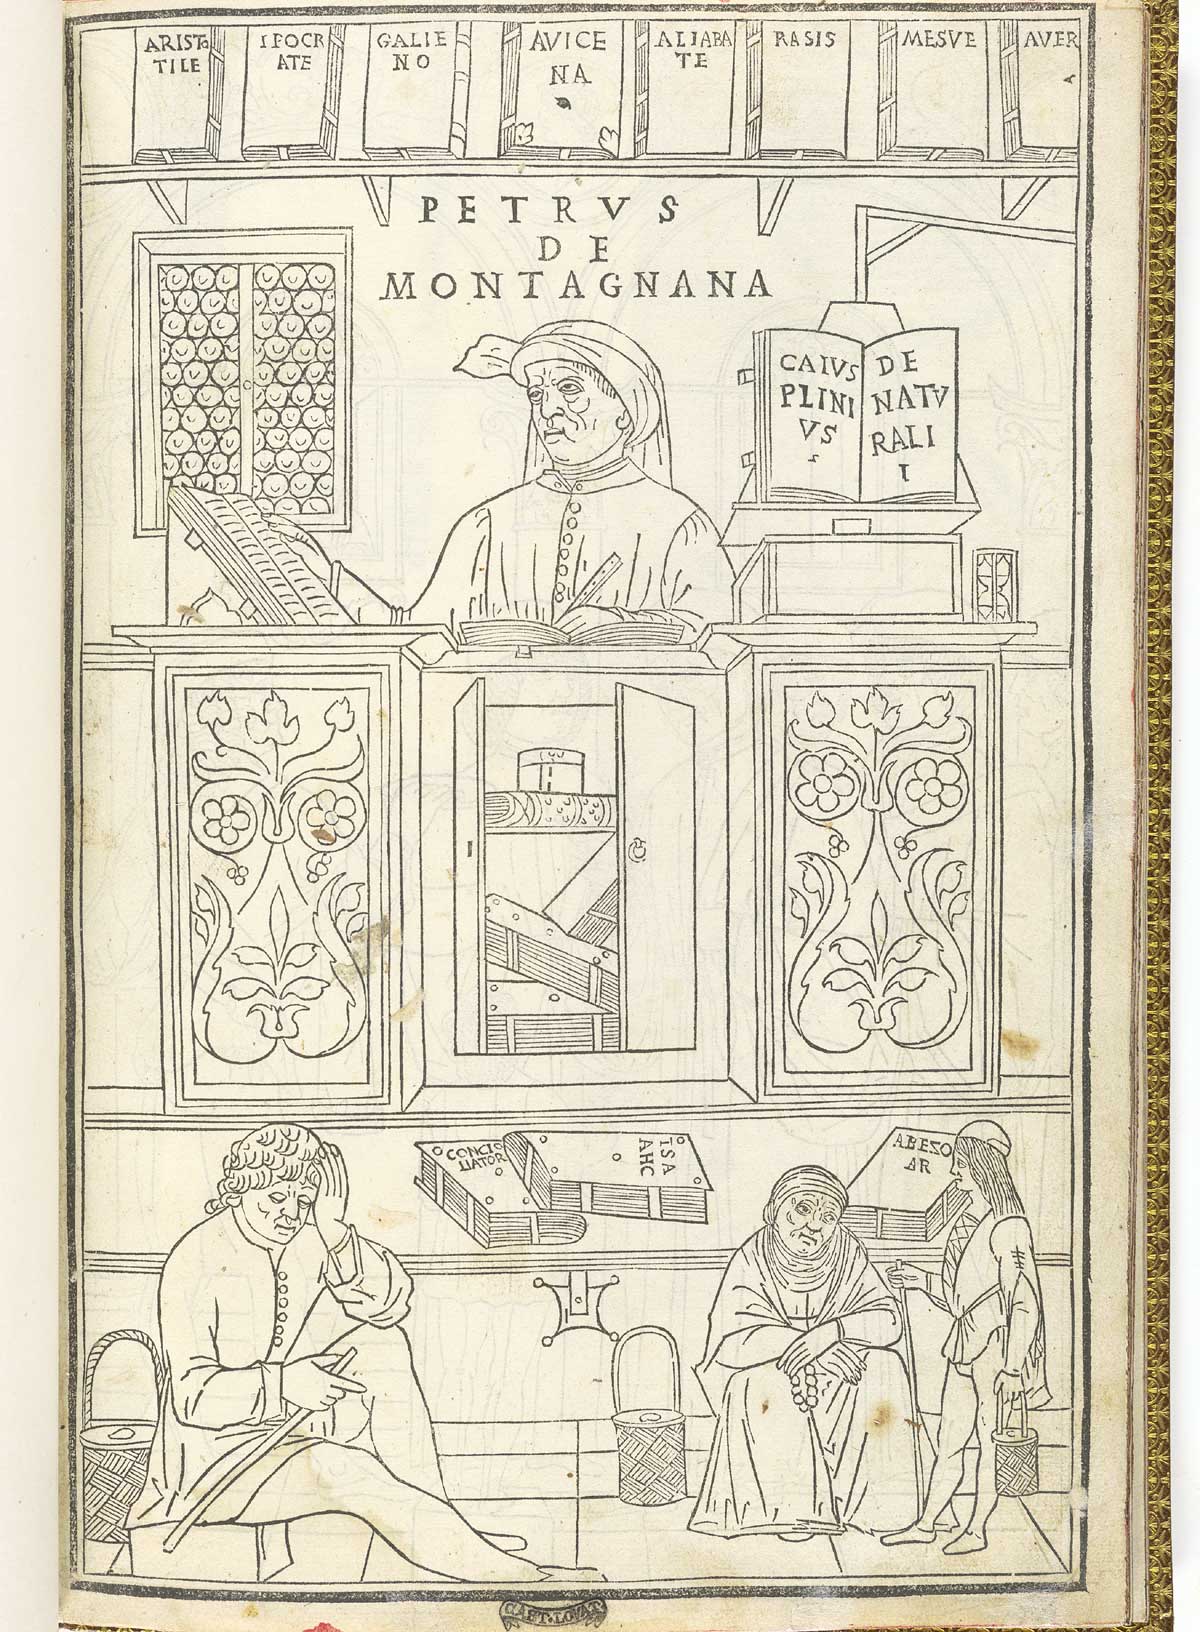 Page 1 of Johannes de Ketham's Fasiculo de medicina, featuring Petrus de Montagnana and his library. The frontispiece features the commentator, translator, and philologist Petrus de Montagnana. He is portrayed as a prototypical Humanist, a man of books, rather than as a physician. The books in his surroundings are medical and include a dozen captioned volumes calling forth the physician’s great authorities. Below Petrus de Montagnana are a sick male and female patient awaiting treatment.